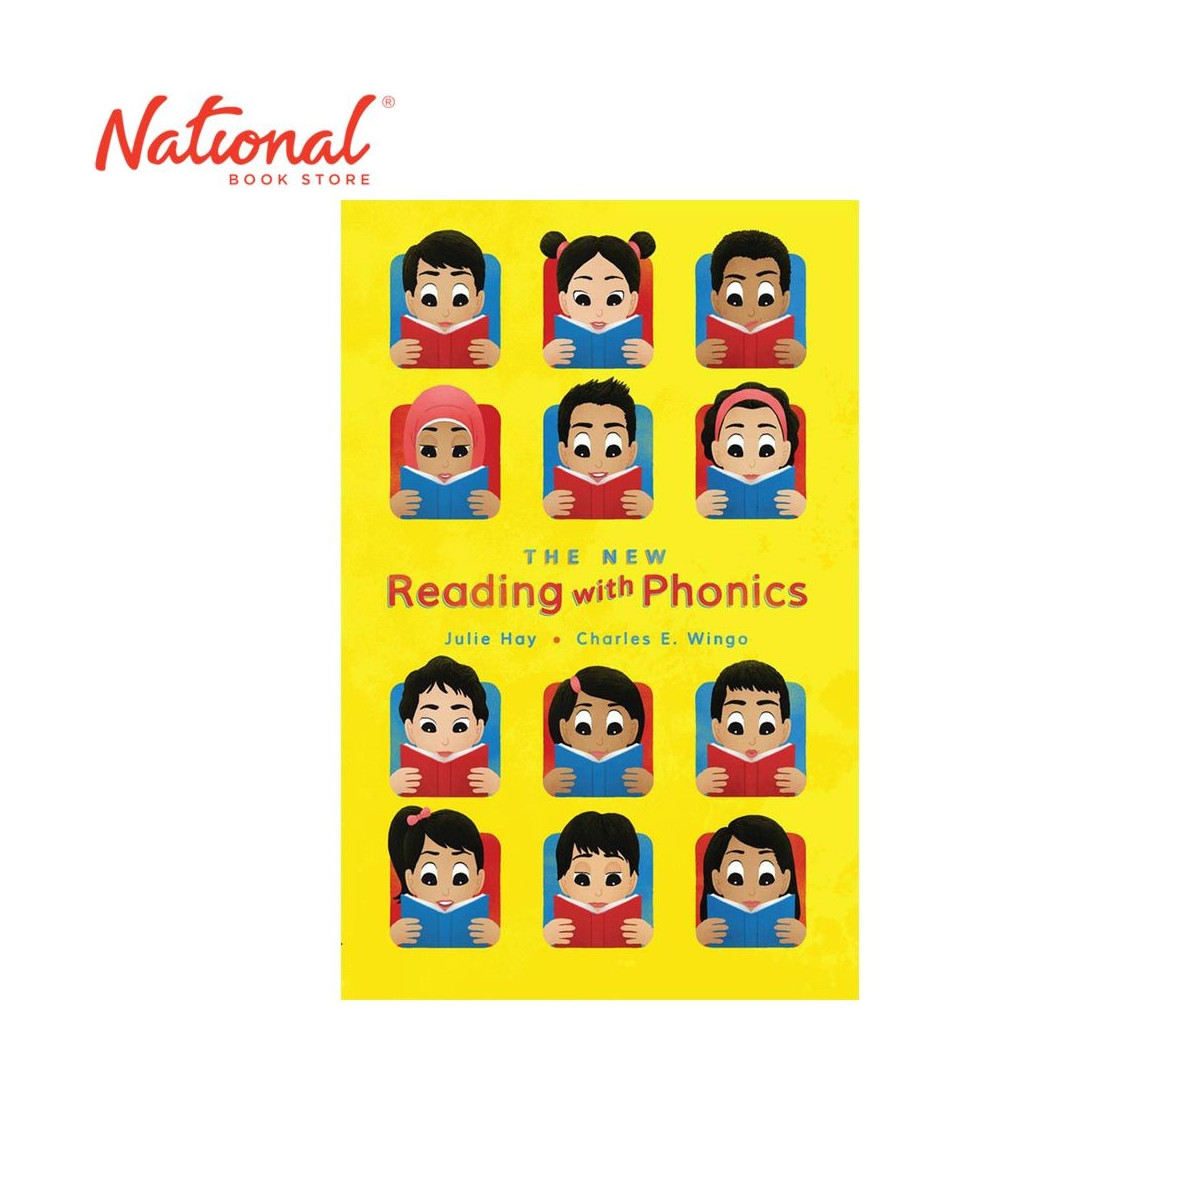 NEW READING WITH PHONICS